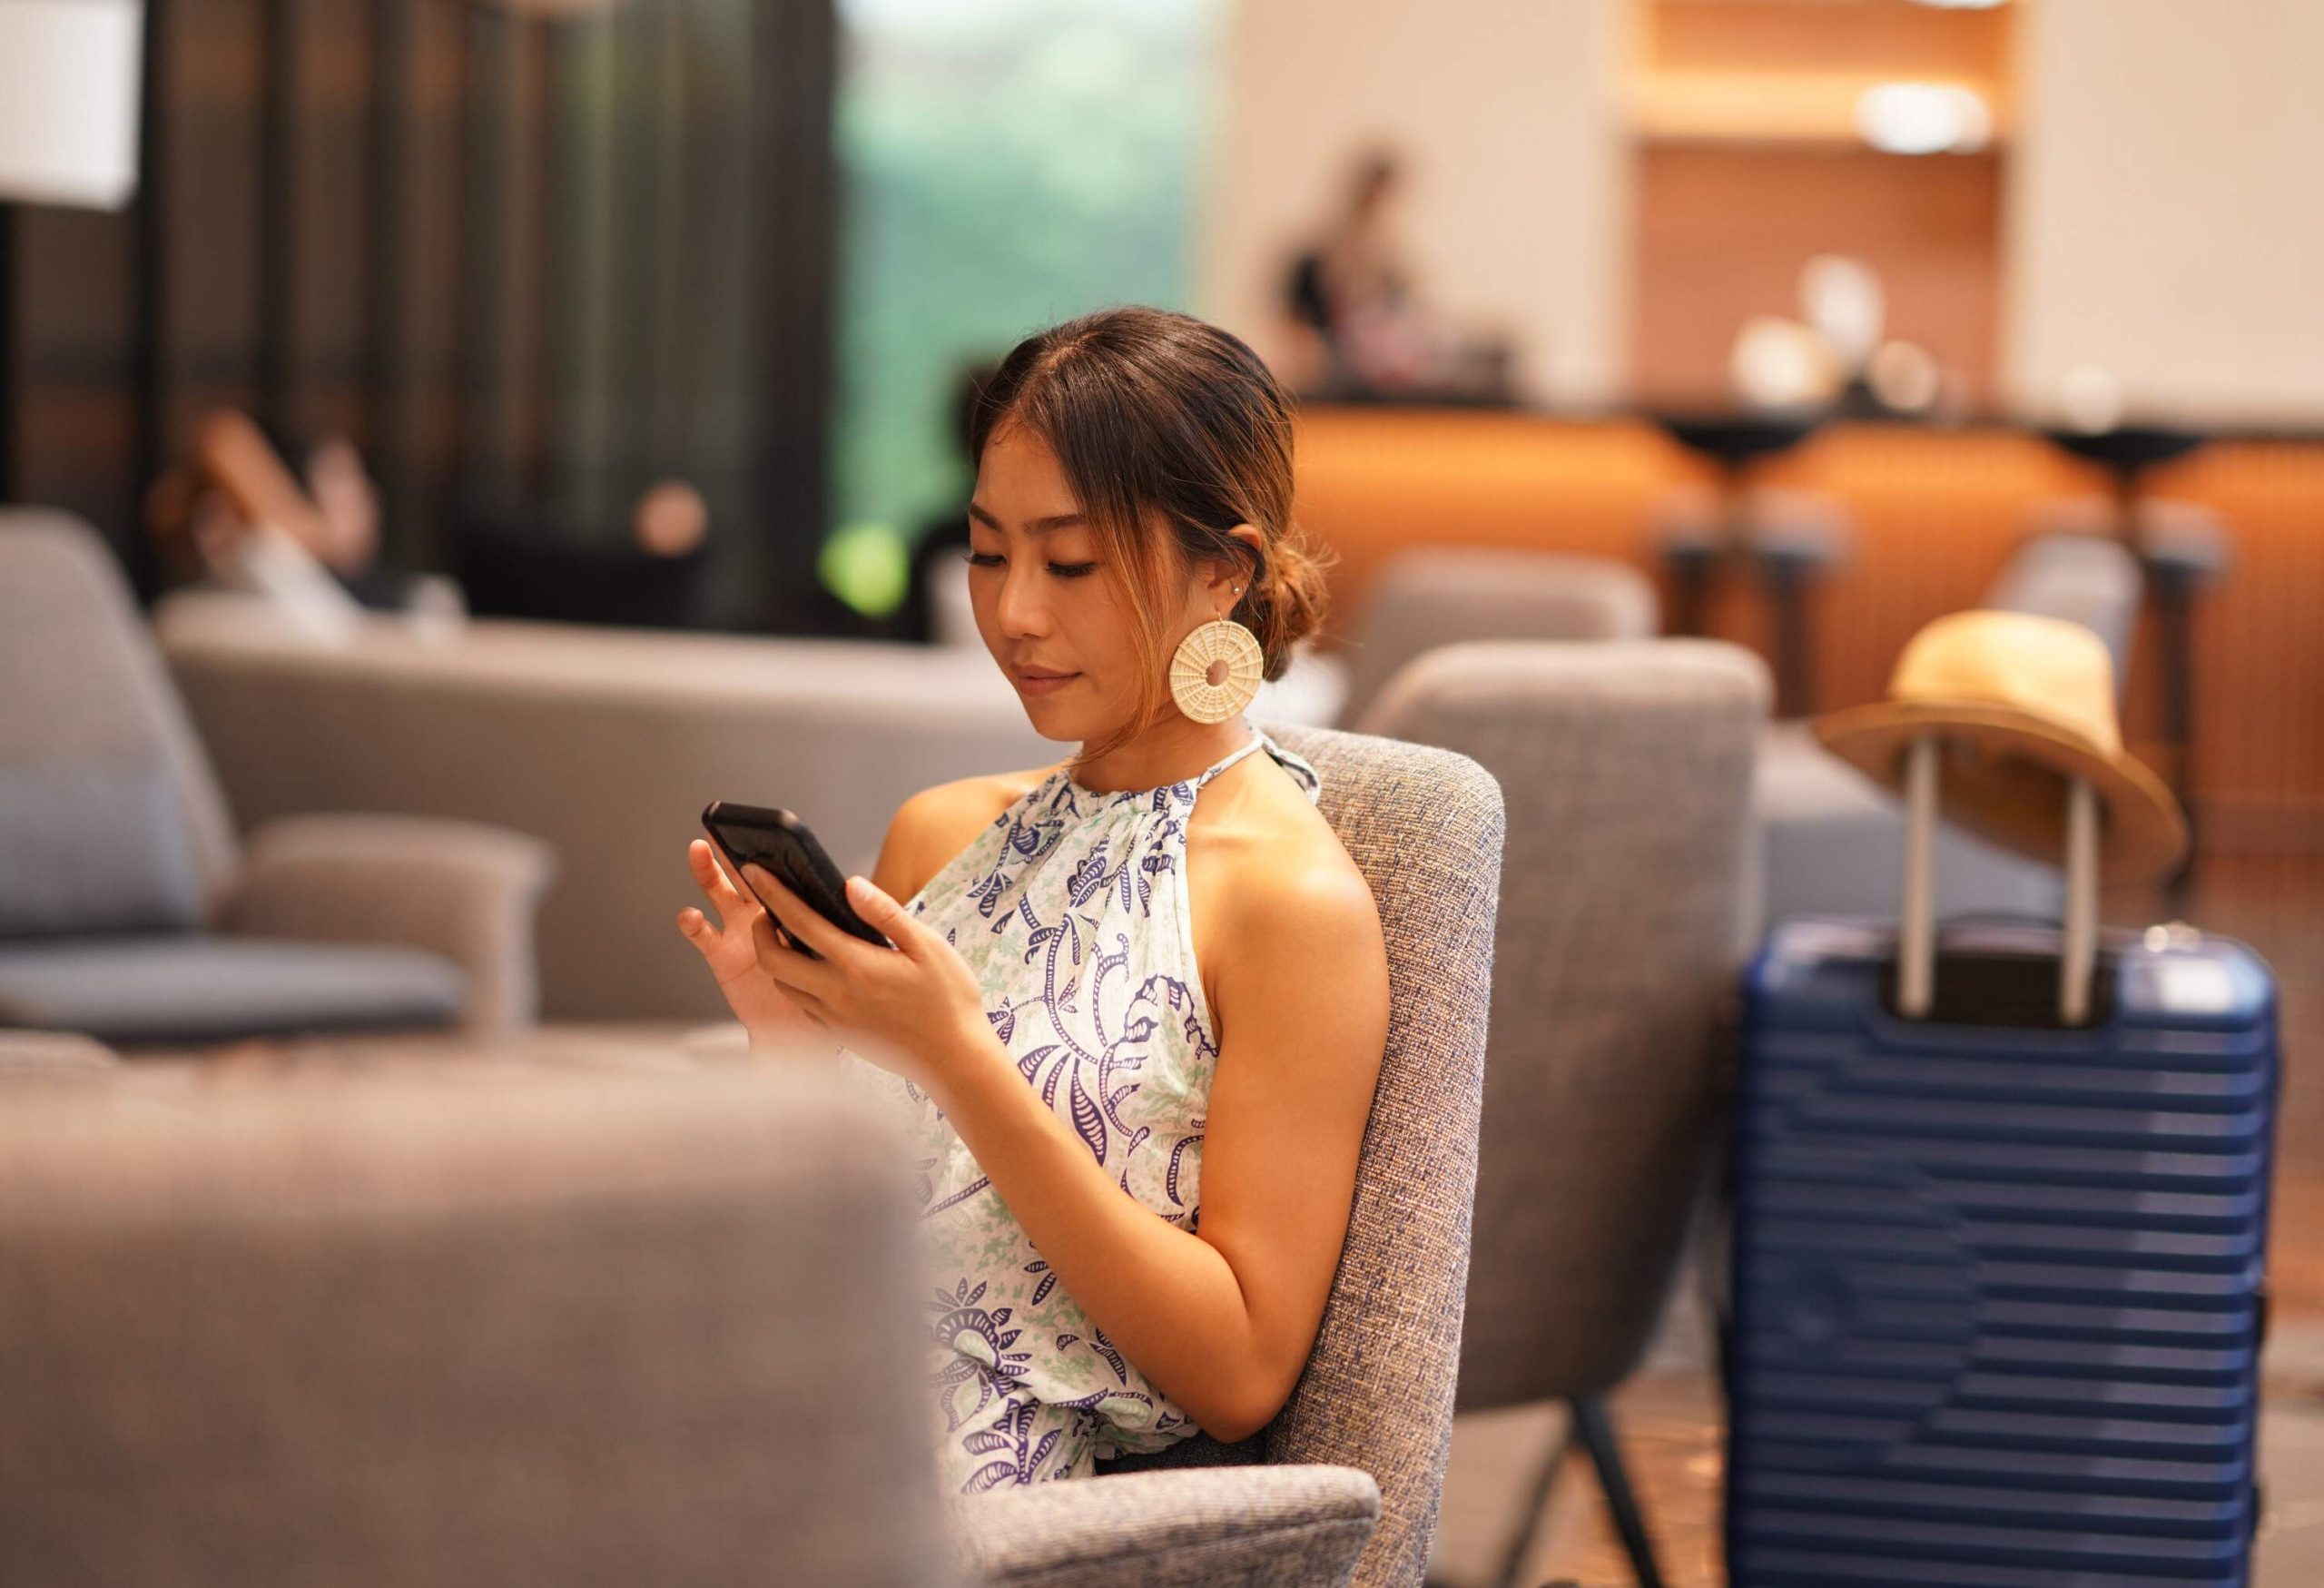 Asian young woman sitting at airport terminal lounge and using phone to chatting.